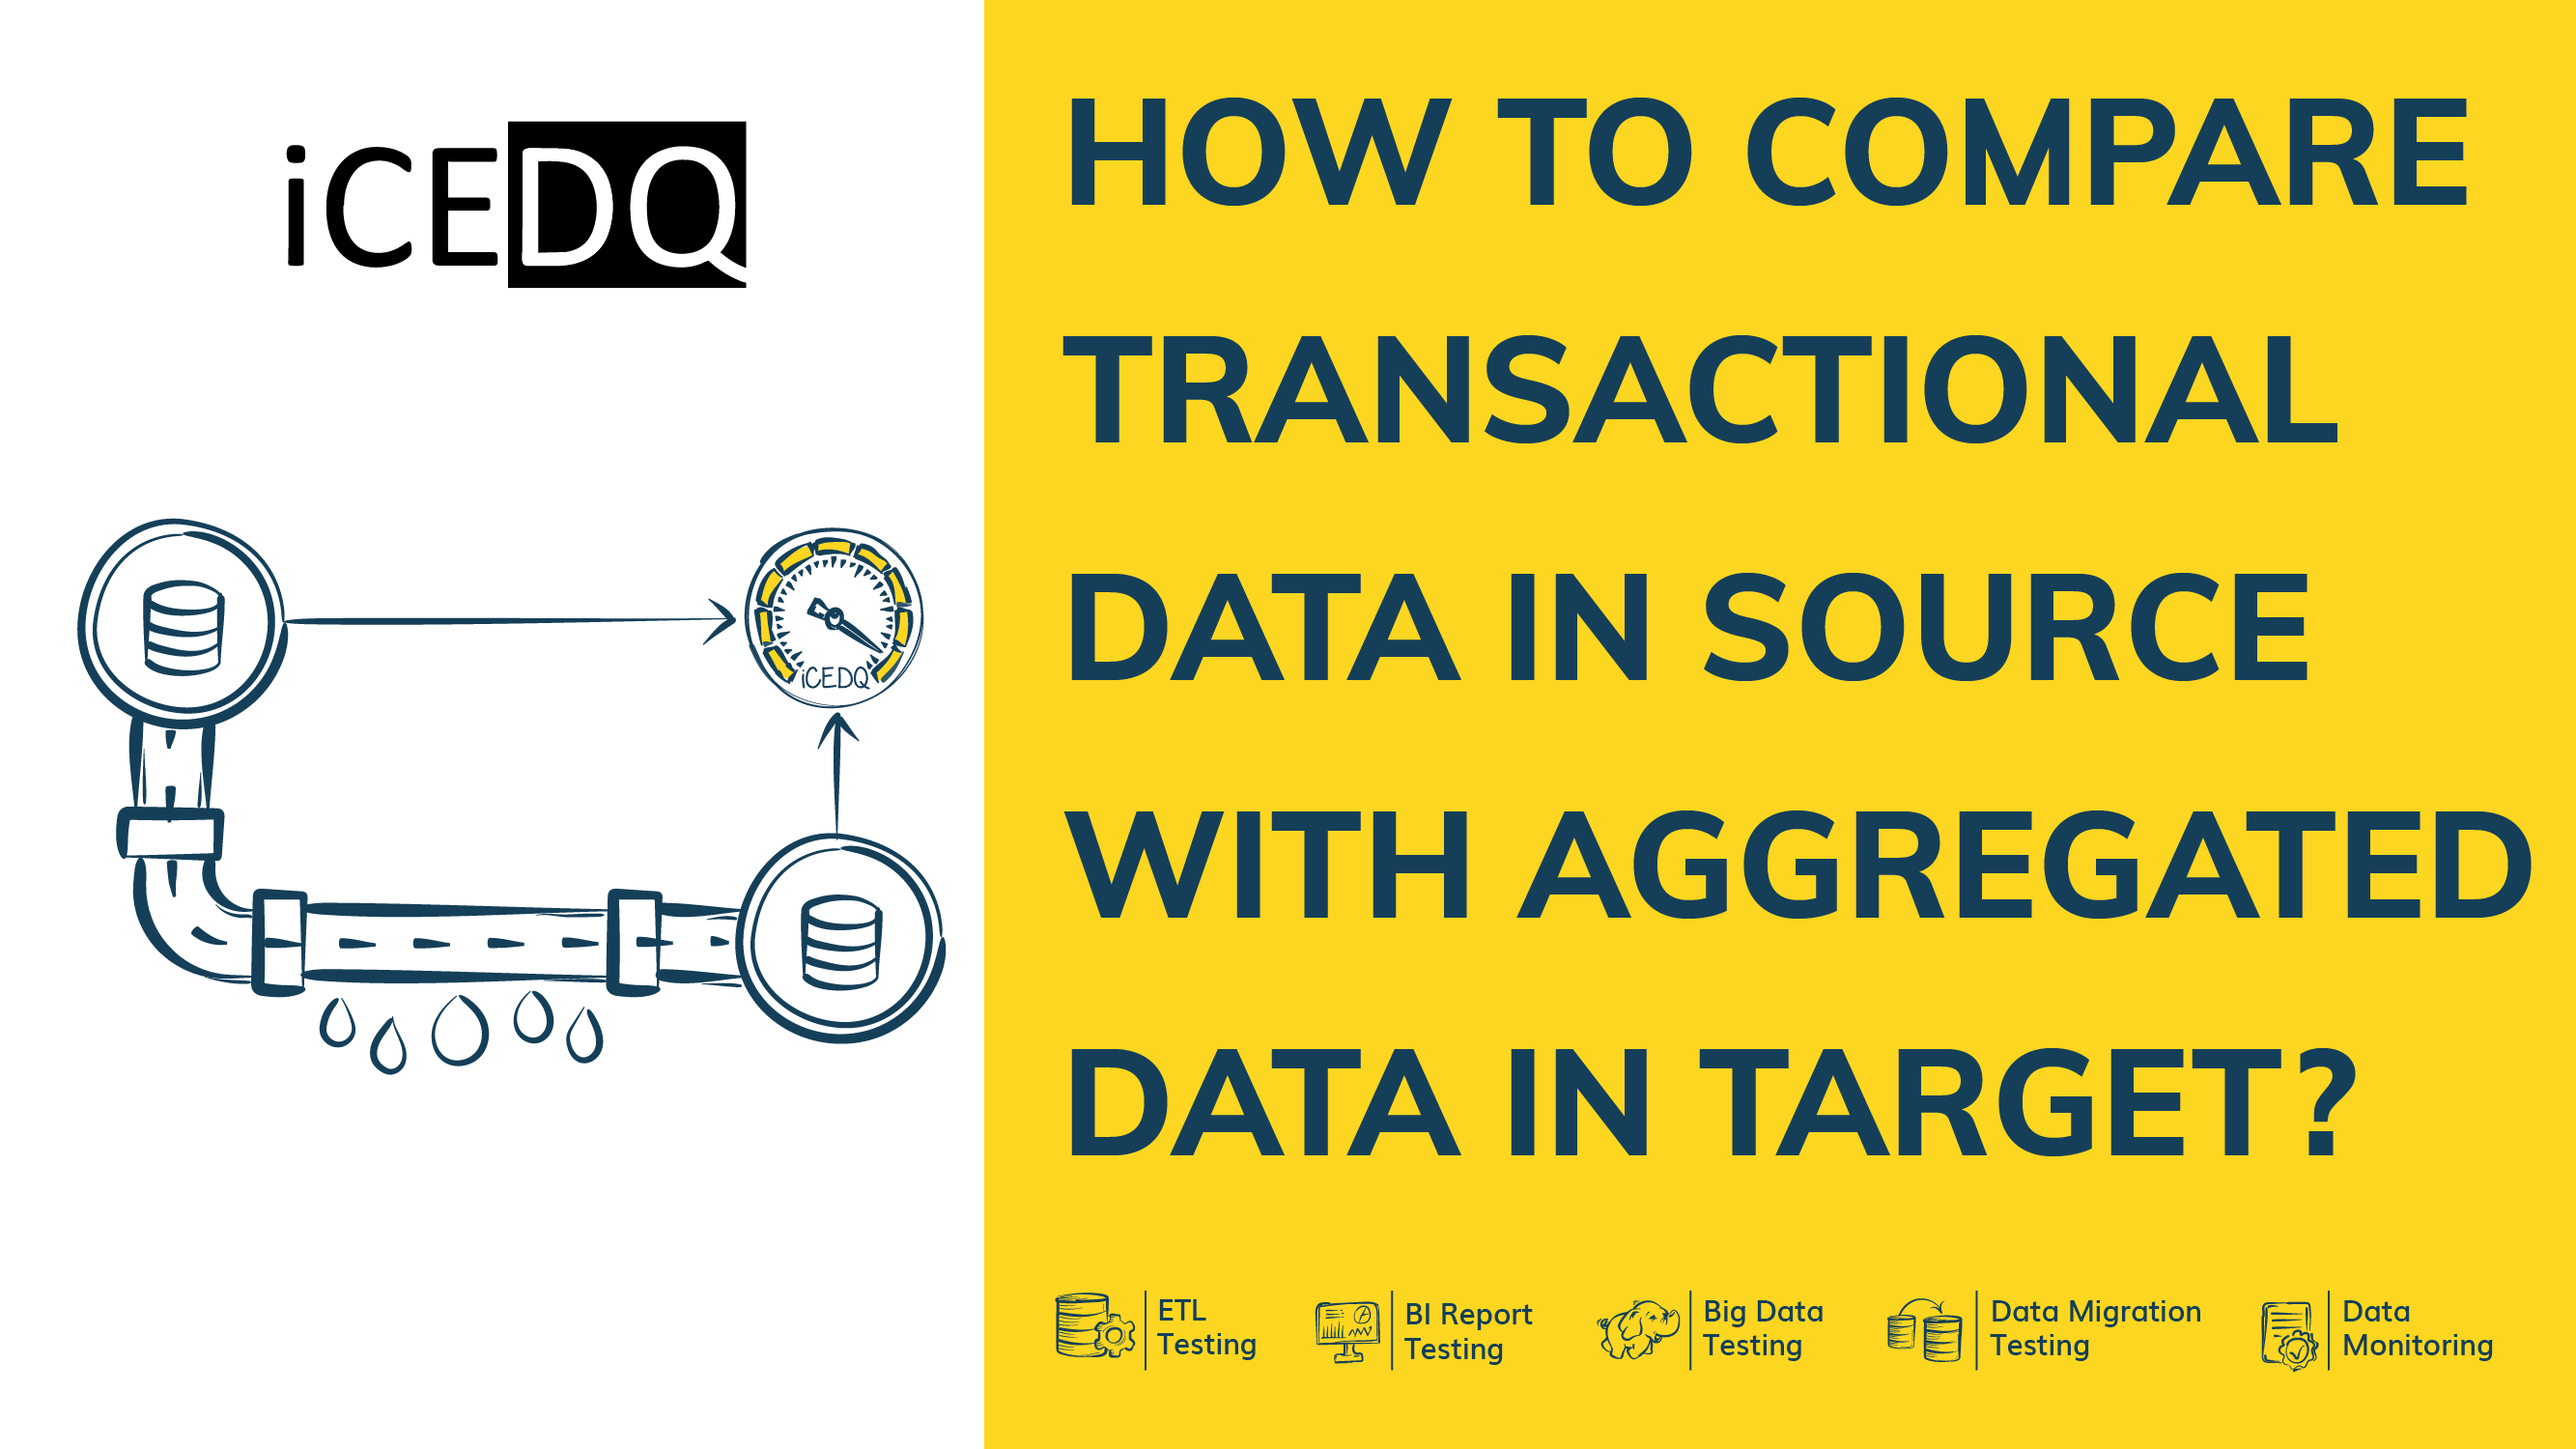 How to Compare Transactional Data in Source with Aggregated Data in Target